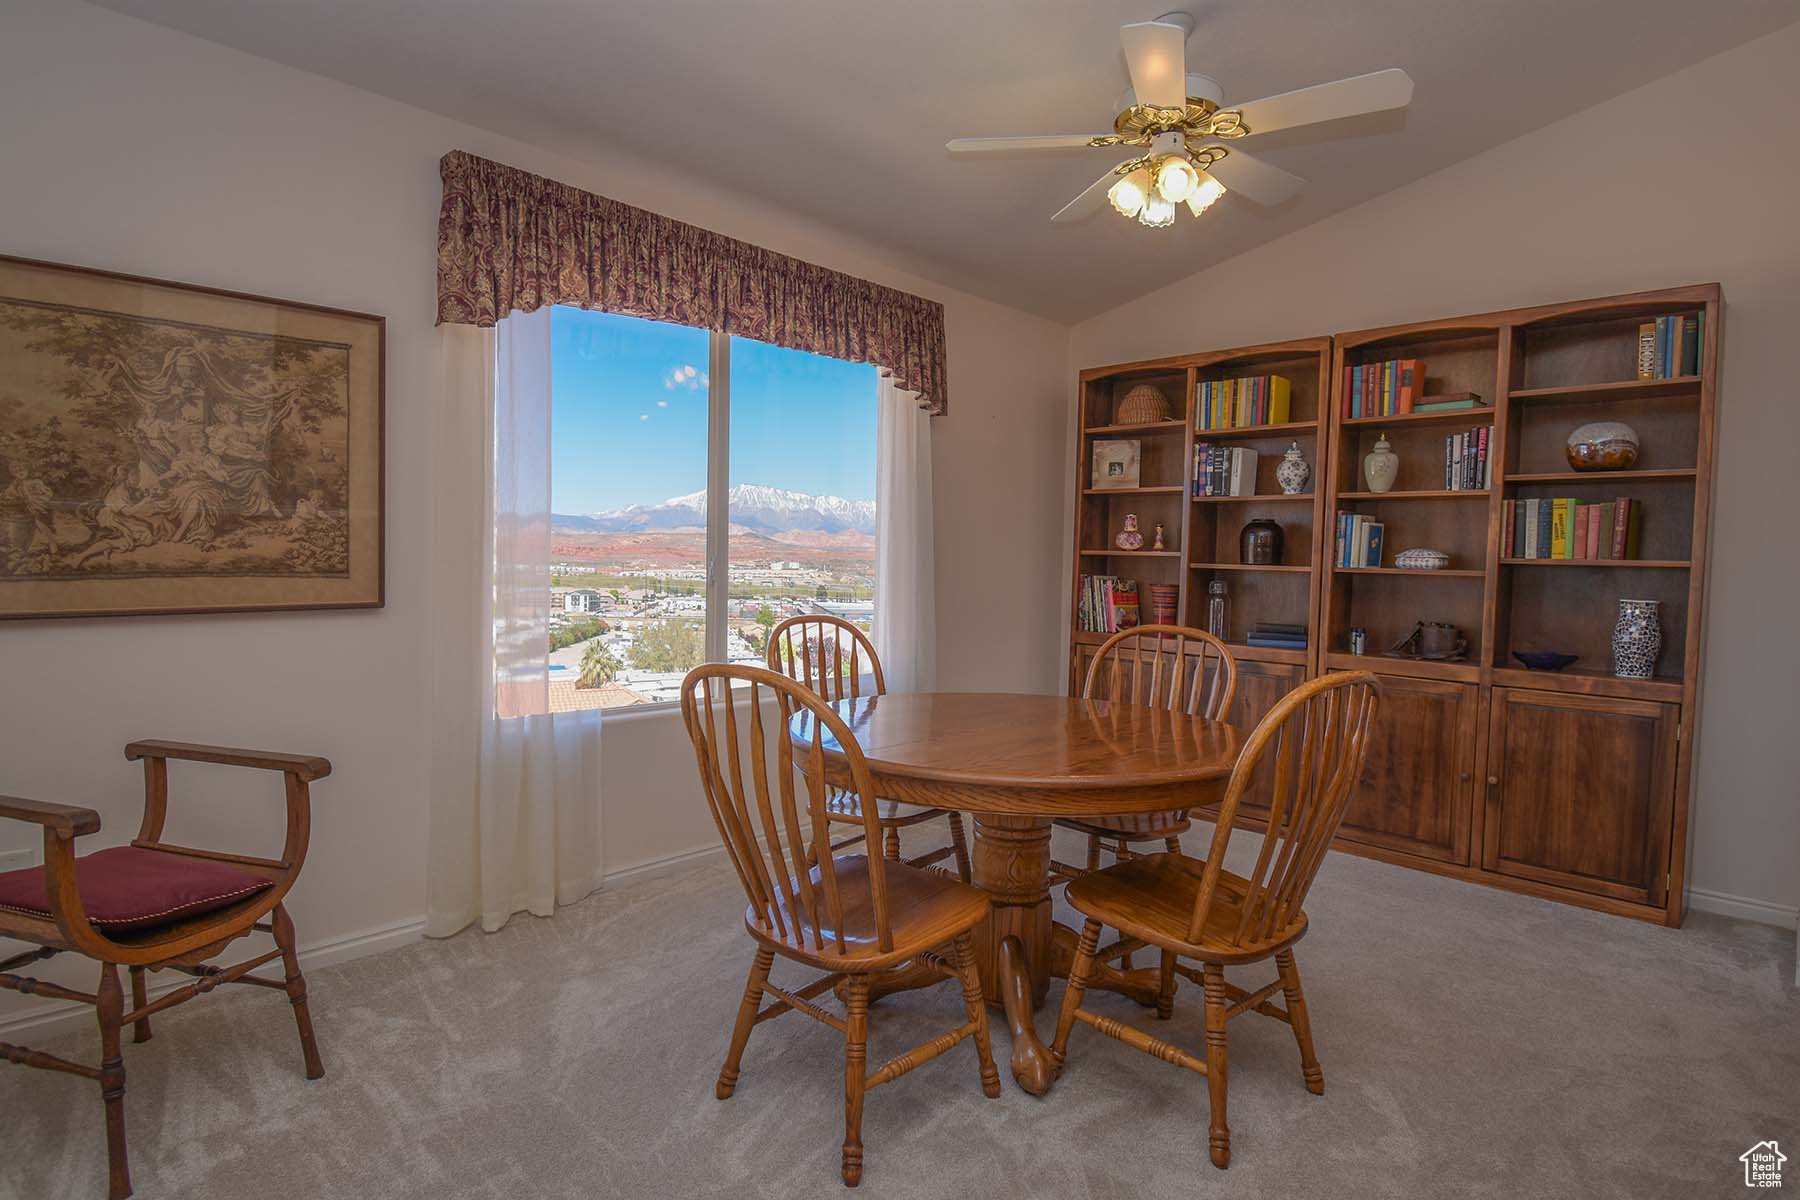 Dining area featuring ceiling fan, light carpet, and vaulted ceiling